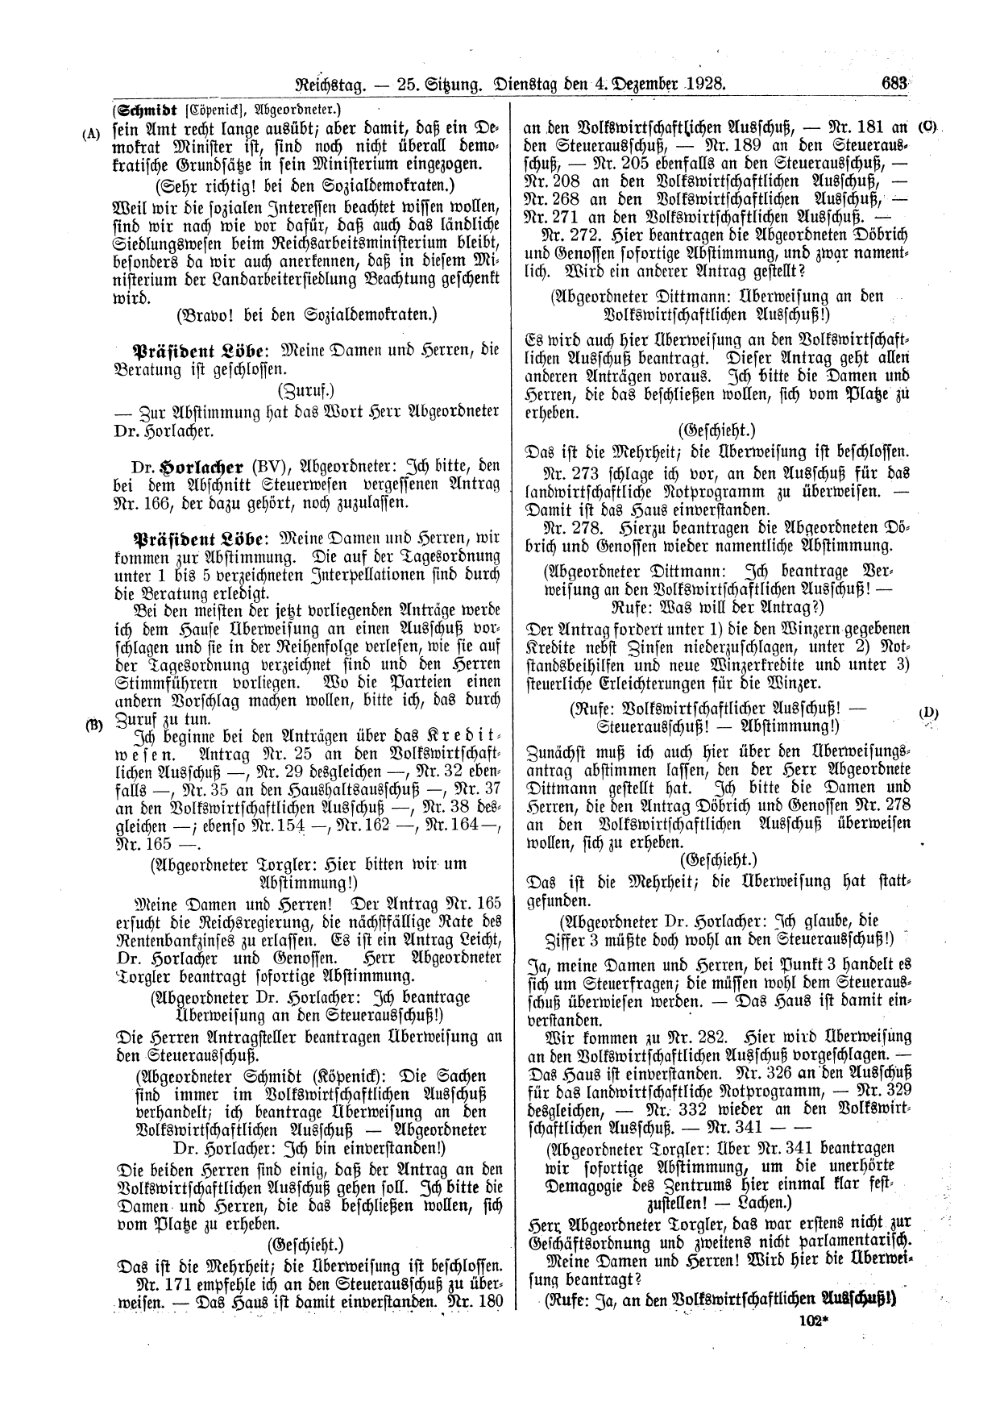 Scan of page 683